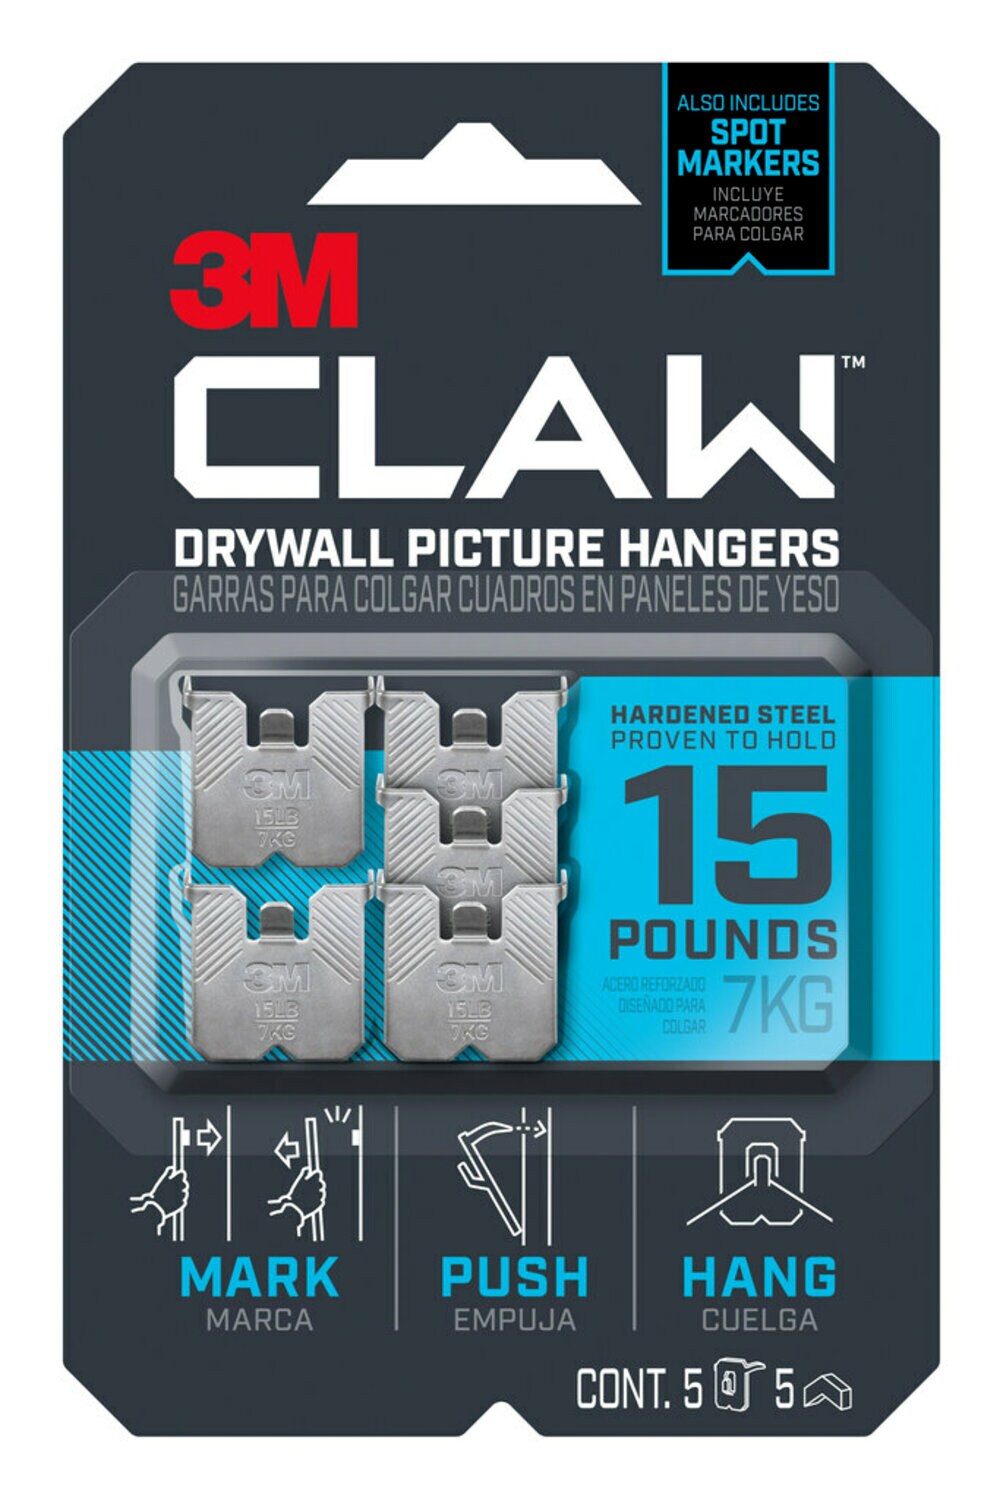 7100233165 - 3M CLAW Drywall Picture Hanger 15 lb with Temporary Spot Marker 3PH15M-5ES, 5 hangers, 5 markers